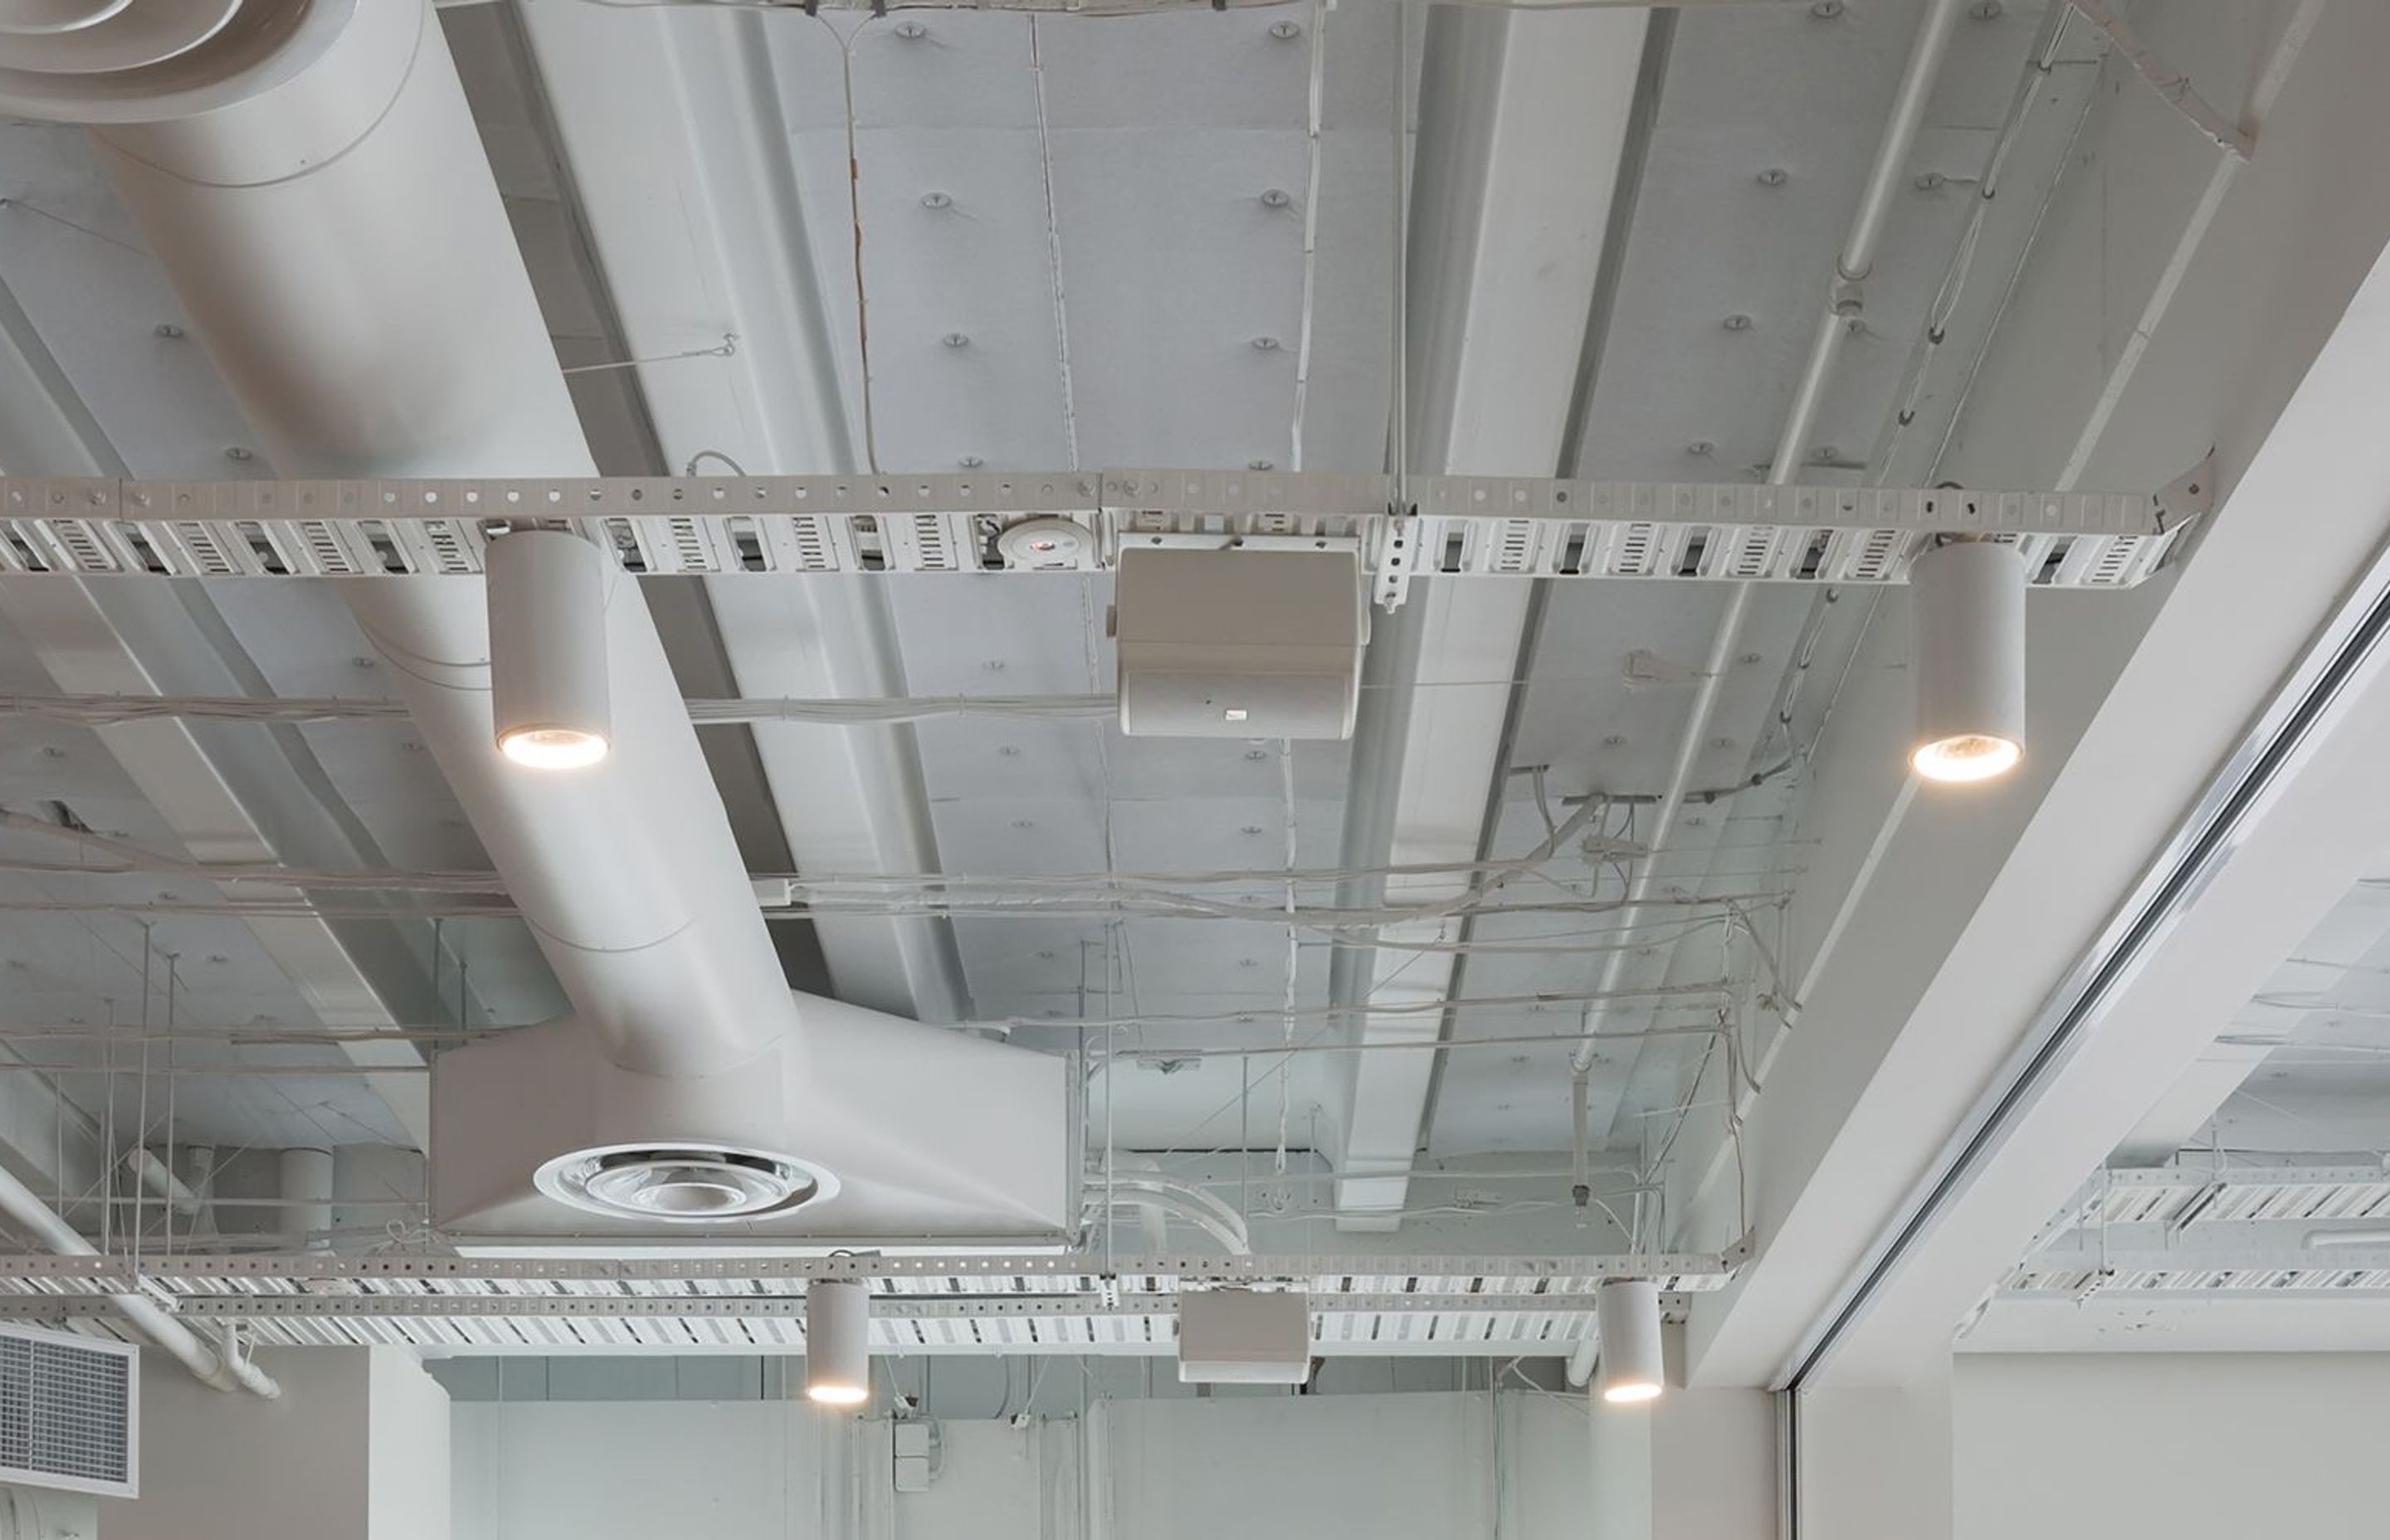 Acoustic Insulation, NZME Office